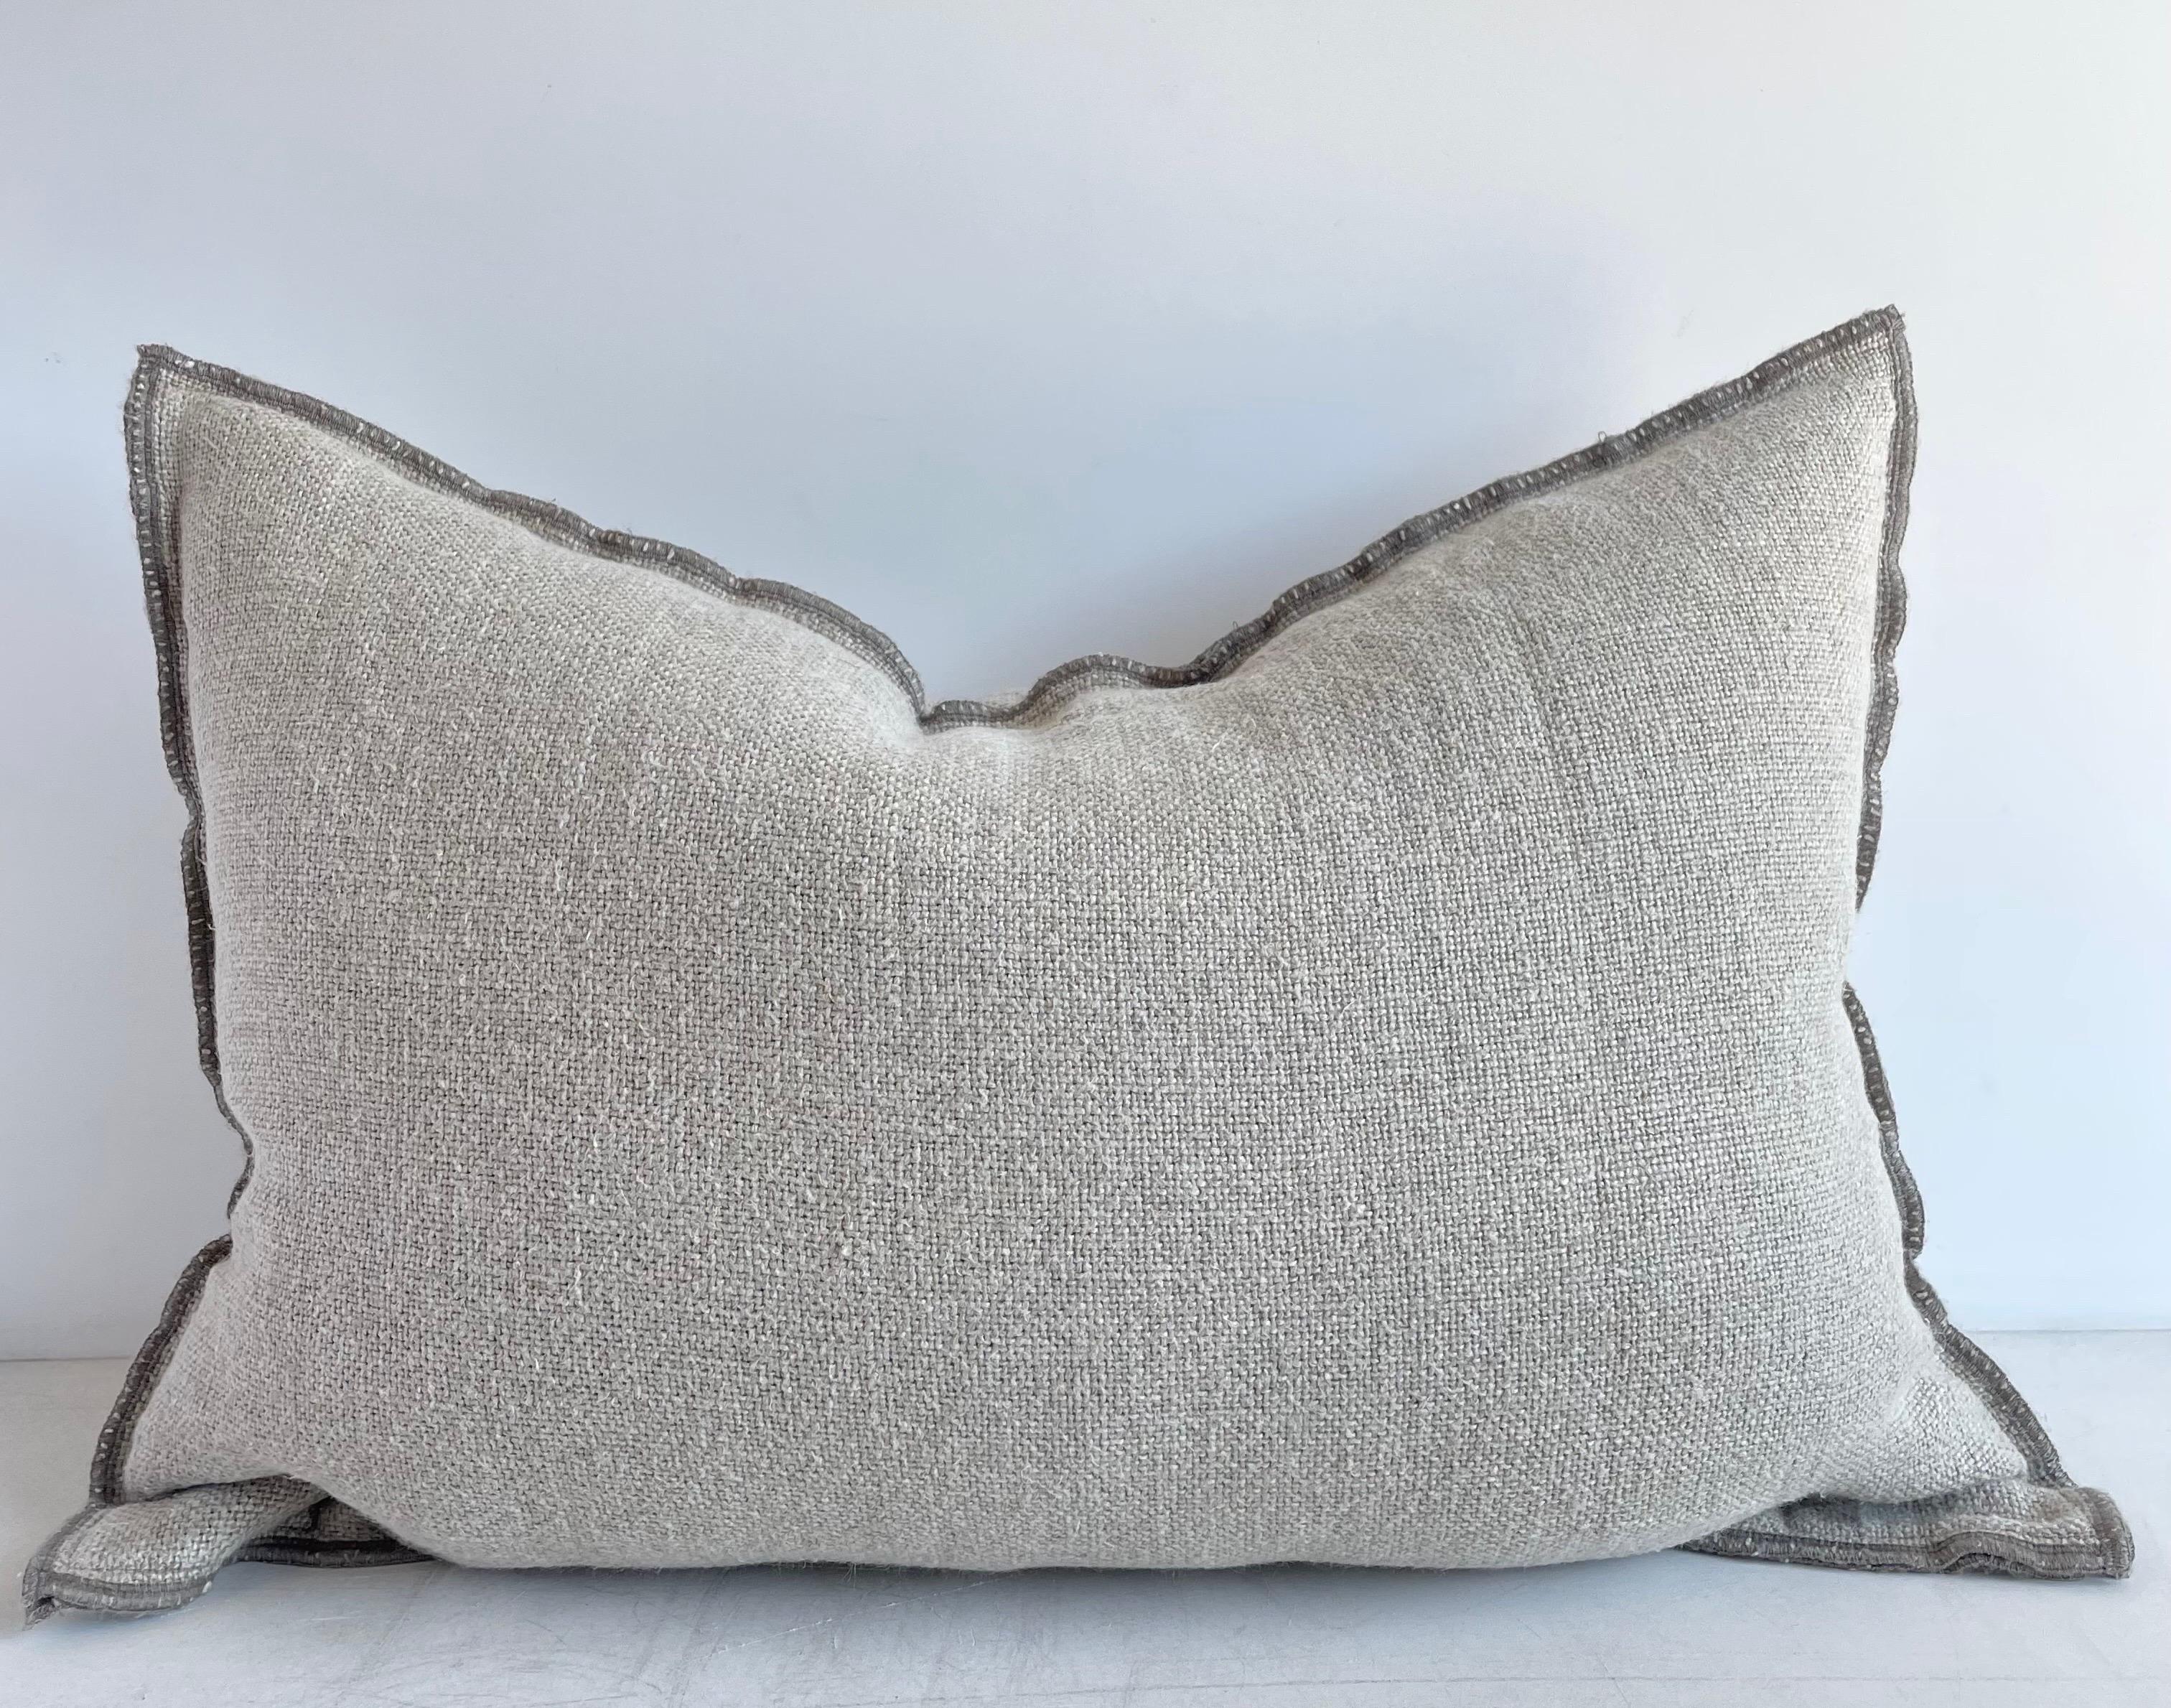 Decorative accent pillow in a thick nubby soft linen.
Size: 16” x 24” when stuffed with insert.
color: Natural Flax 
Decorative Metal buttons at top, or can be used at the bottom, with a decorative stitched edging.
This does not come with